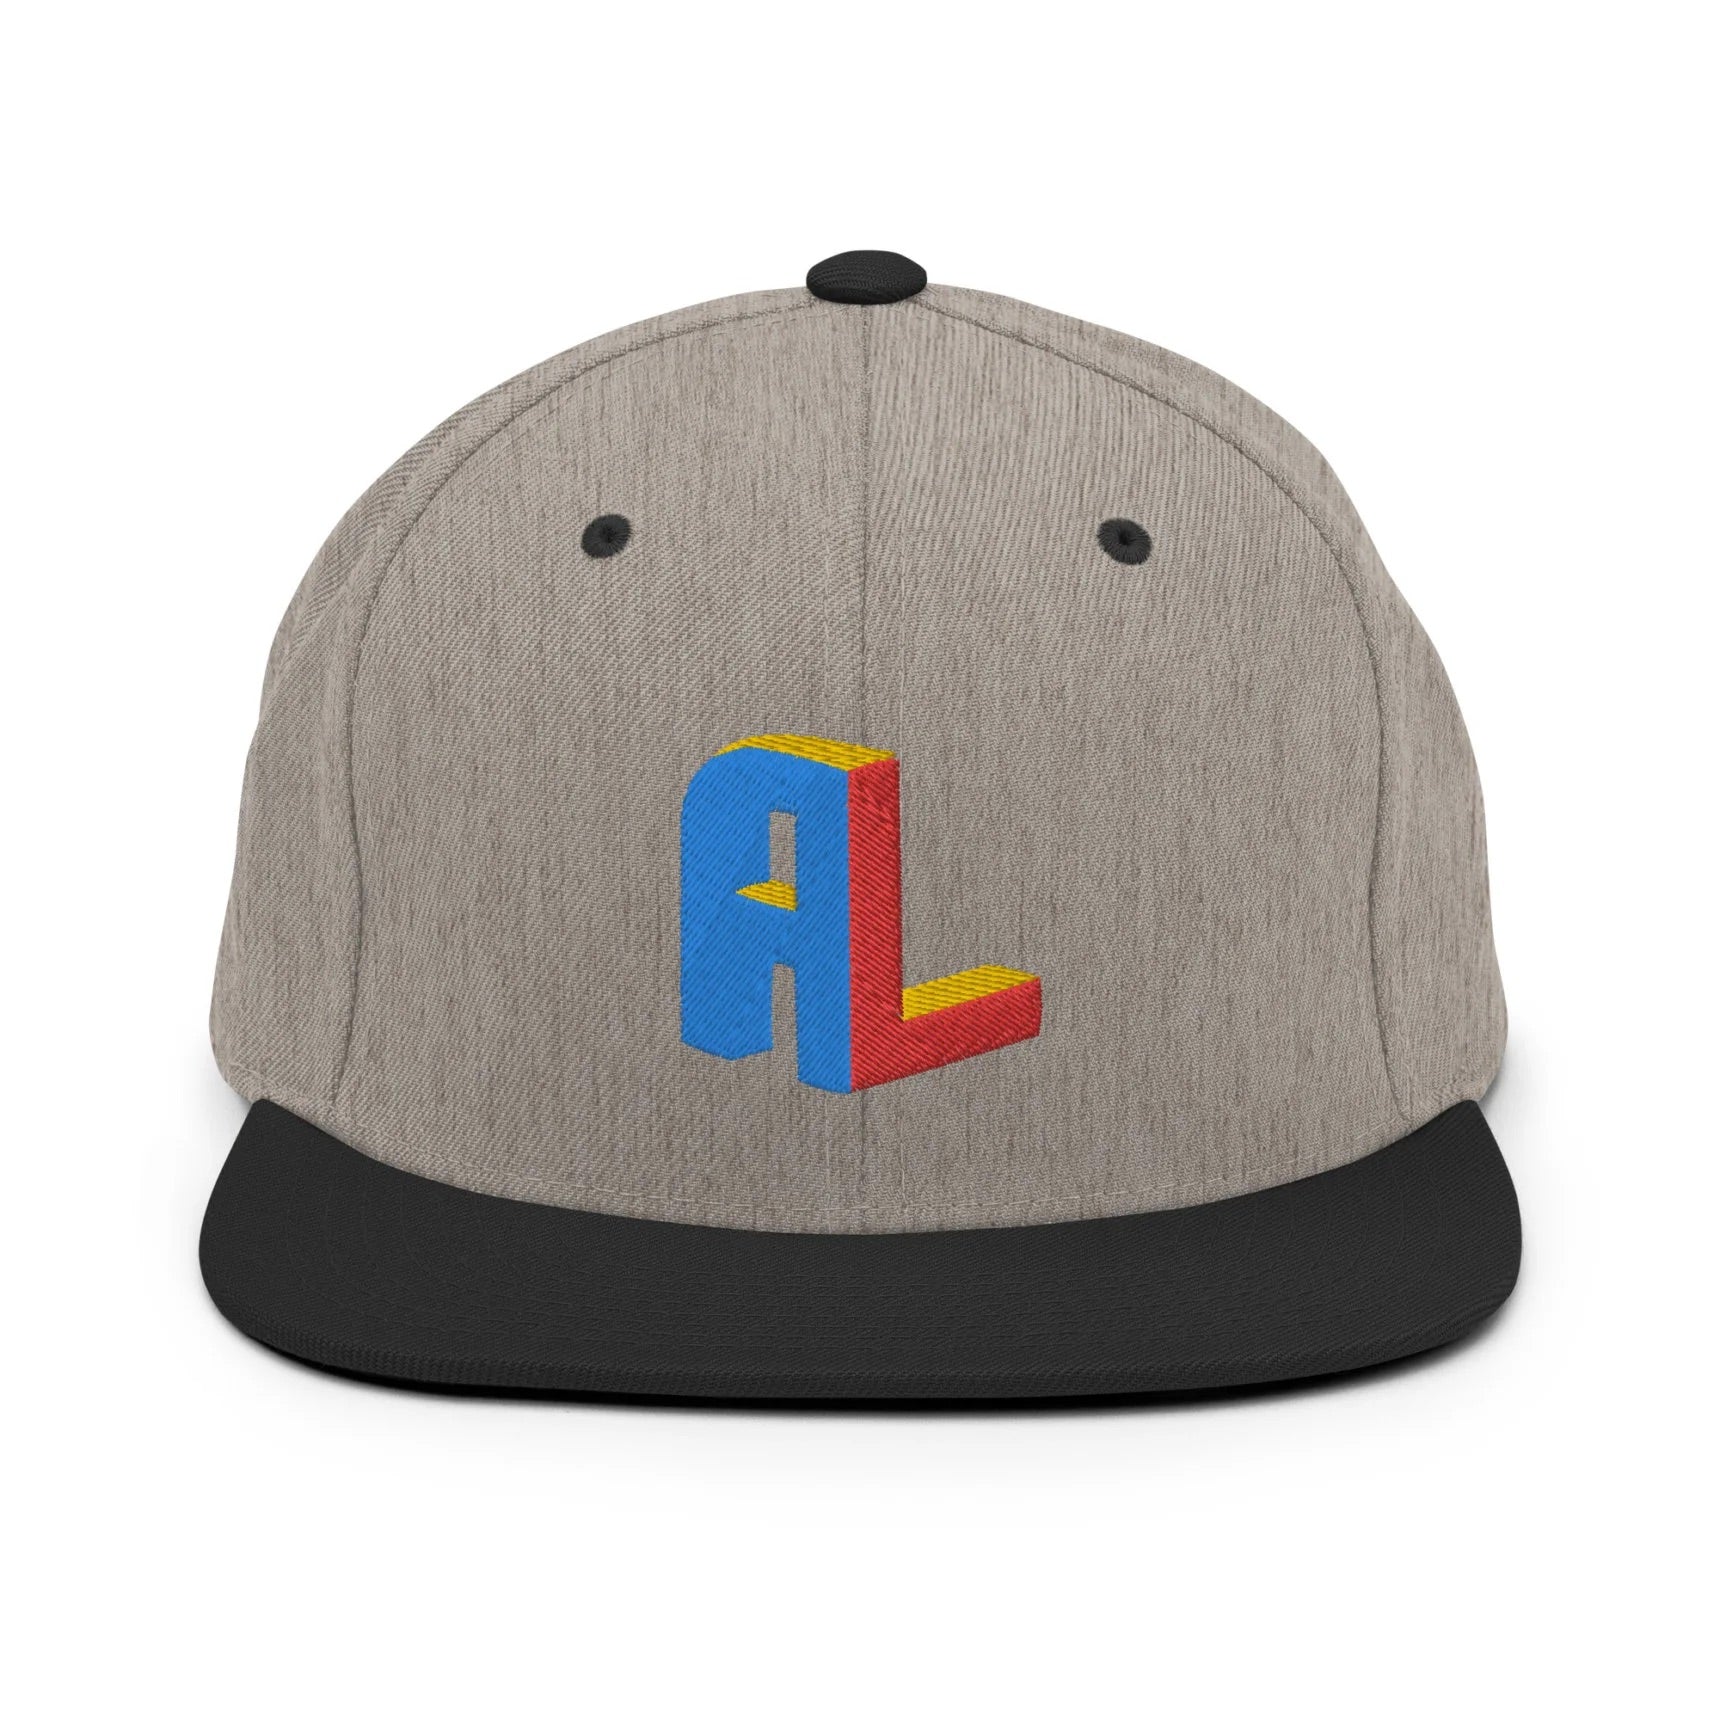 Ance Larmstrong ShowZone snapback hat in heather grey with black brim and accents